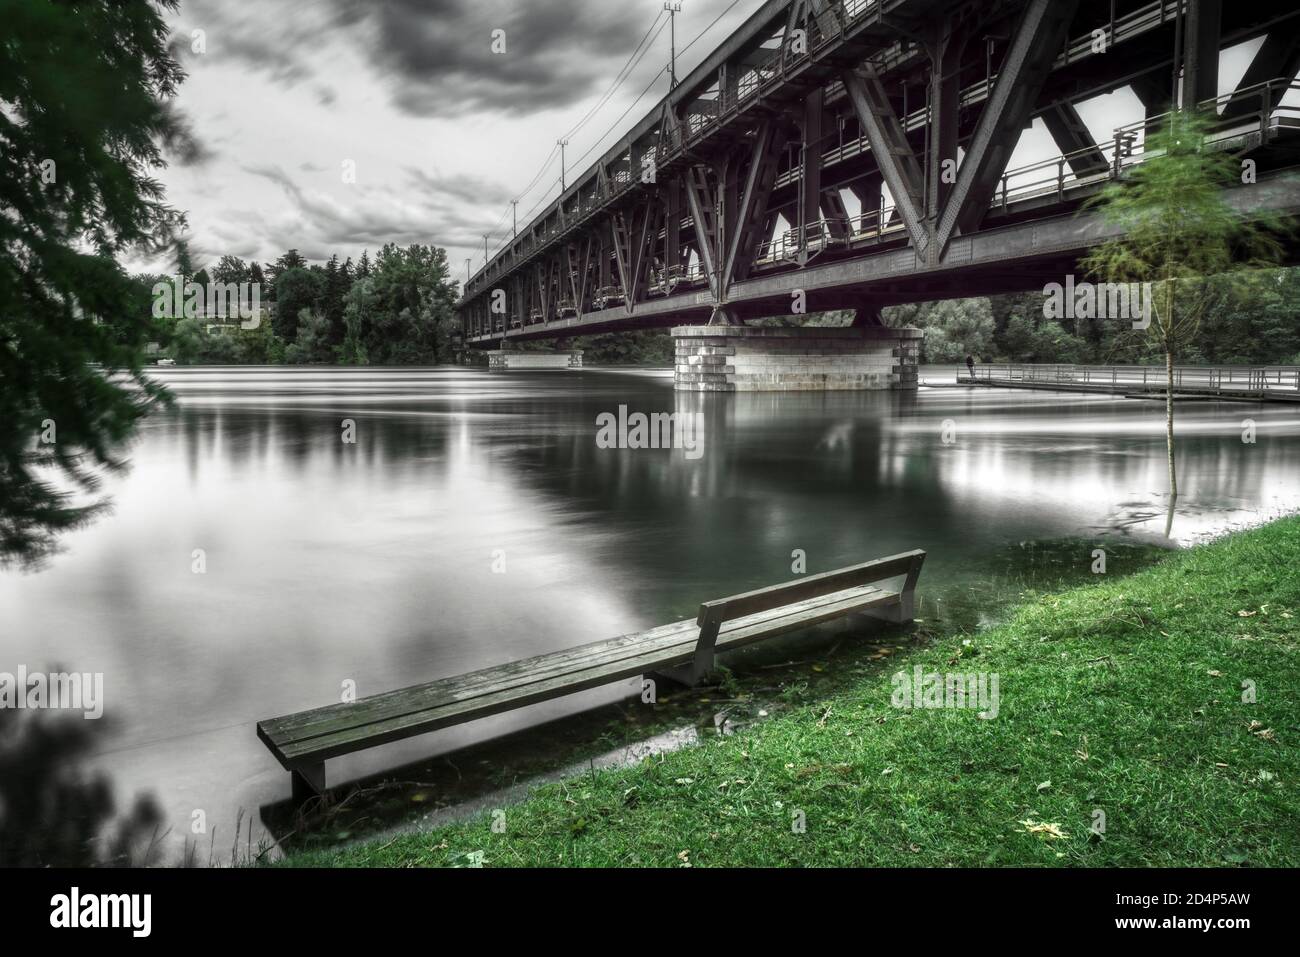 flood of the Ticino river in a cloudy day, rainy season with long time exposure Stock Photo